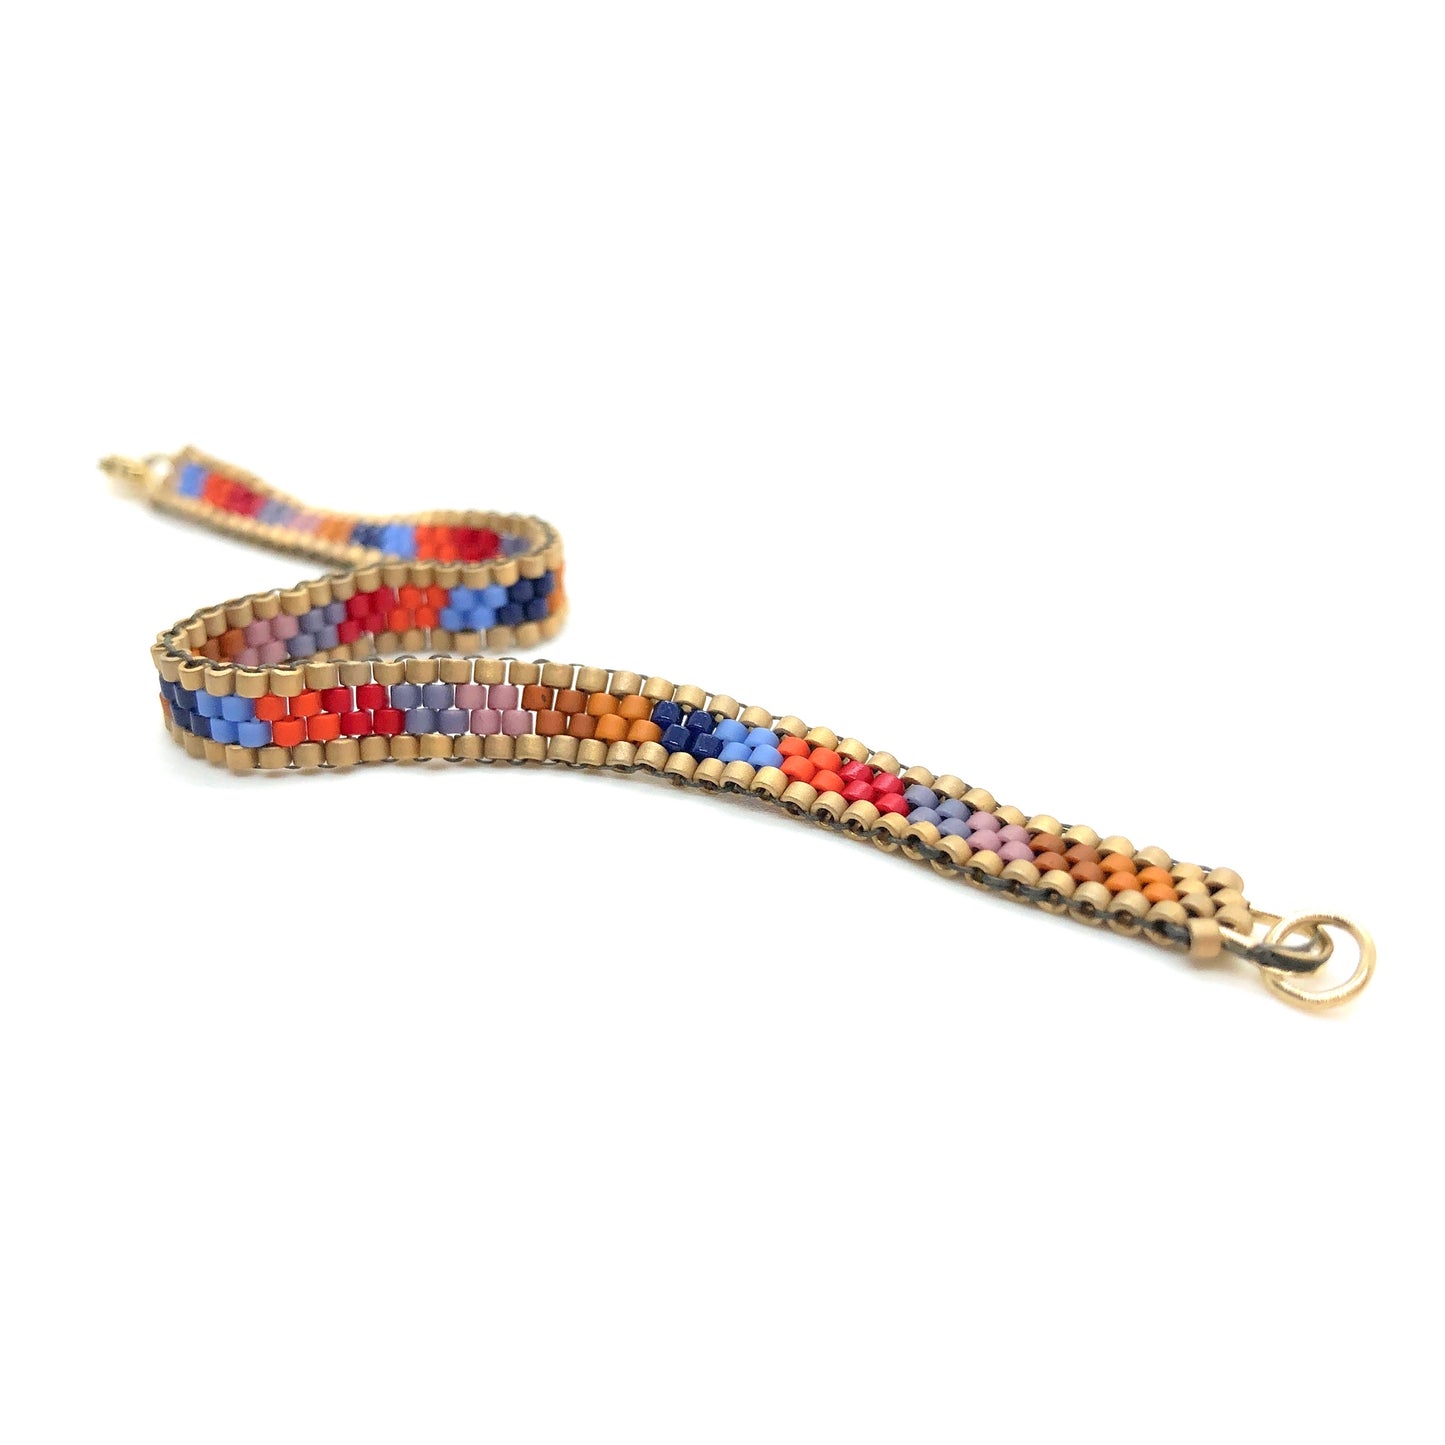 Red, brown, blue candy strip seed bead thin bracelet.